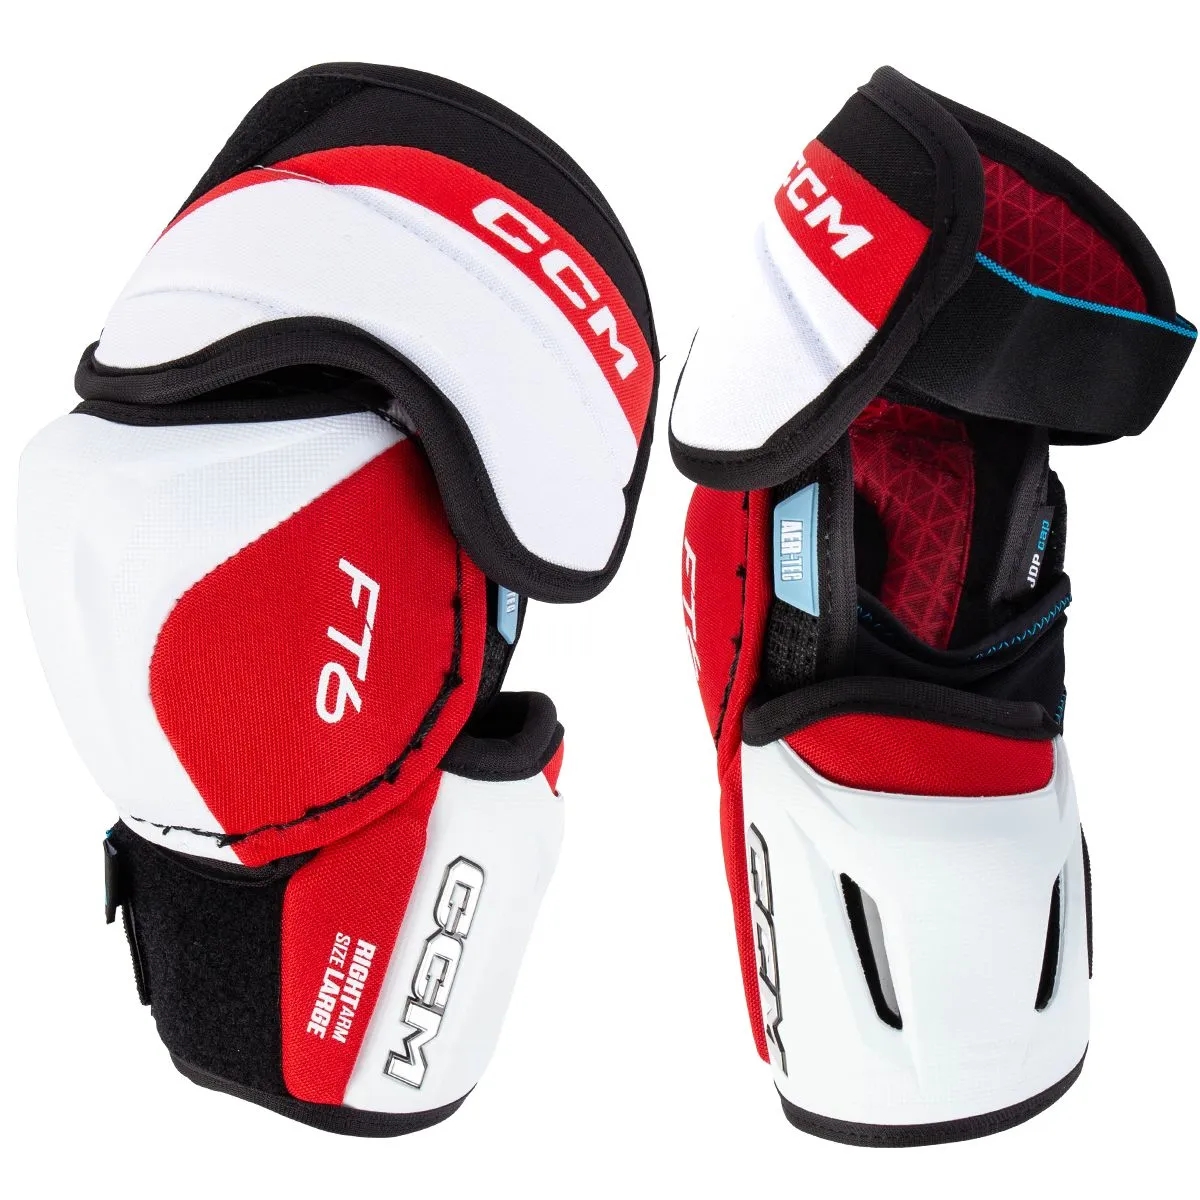 CCM Jetspeed FT6 Jr. Hockey Elbow Padsproduct zoom image #1